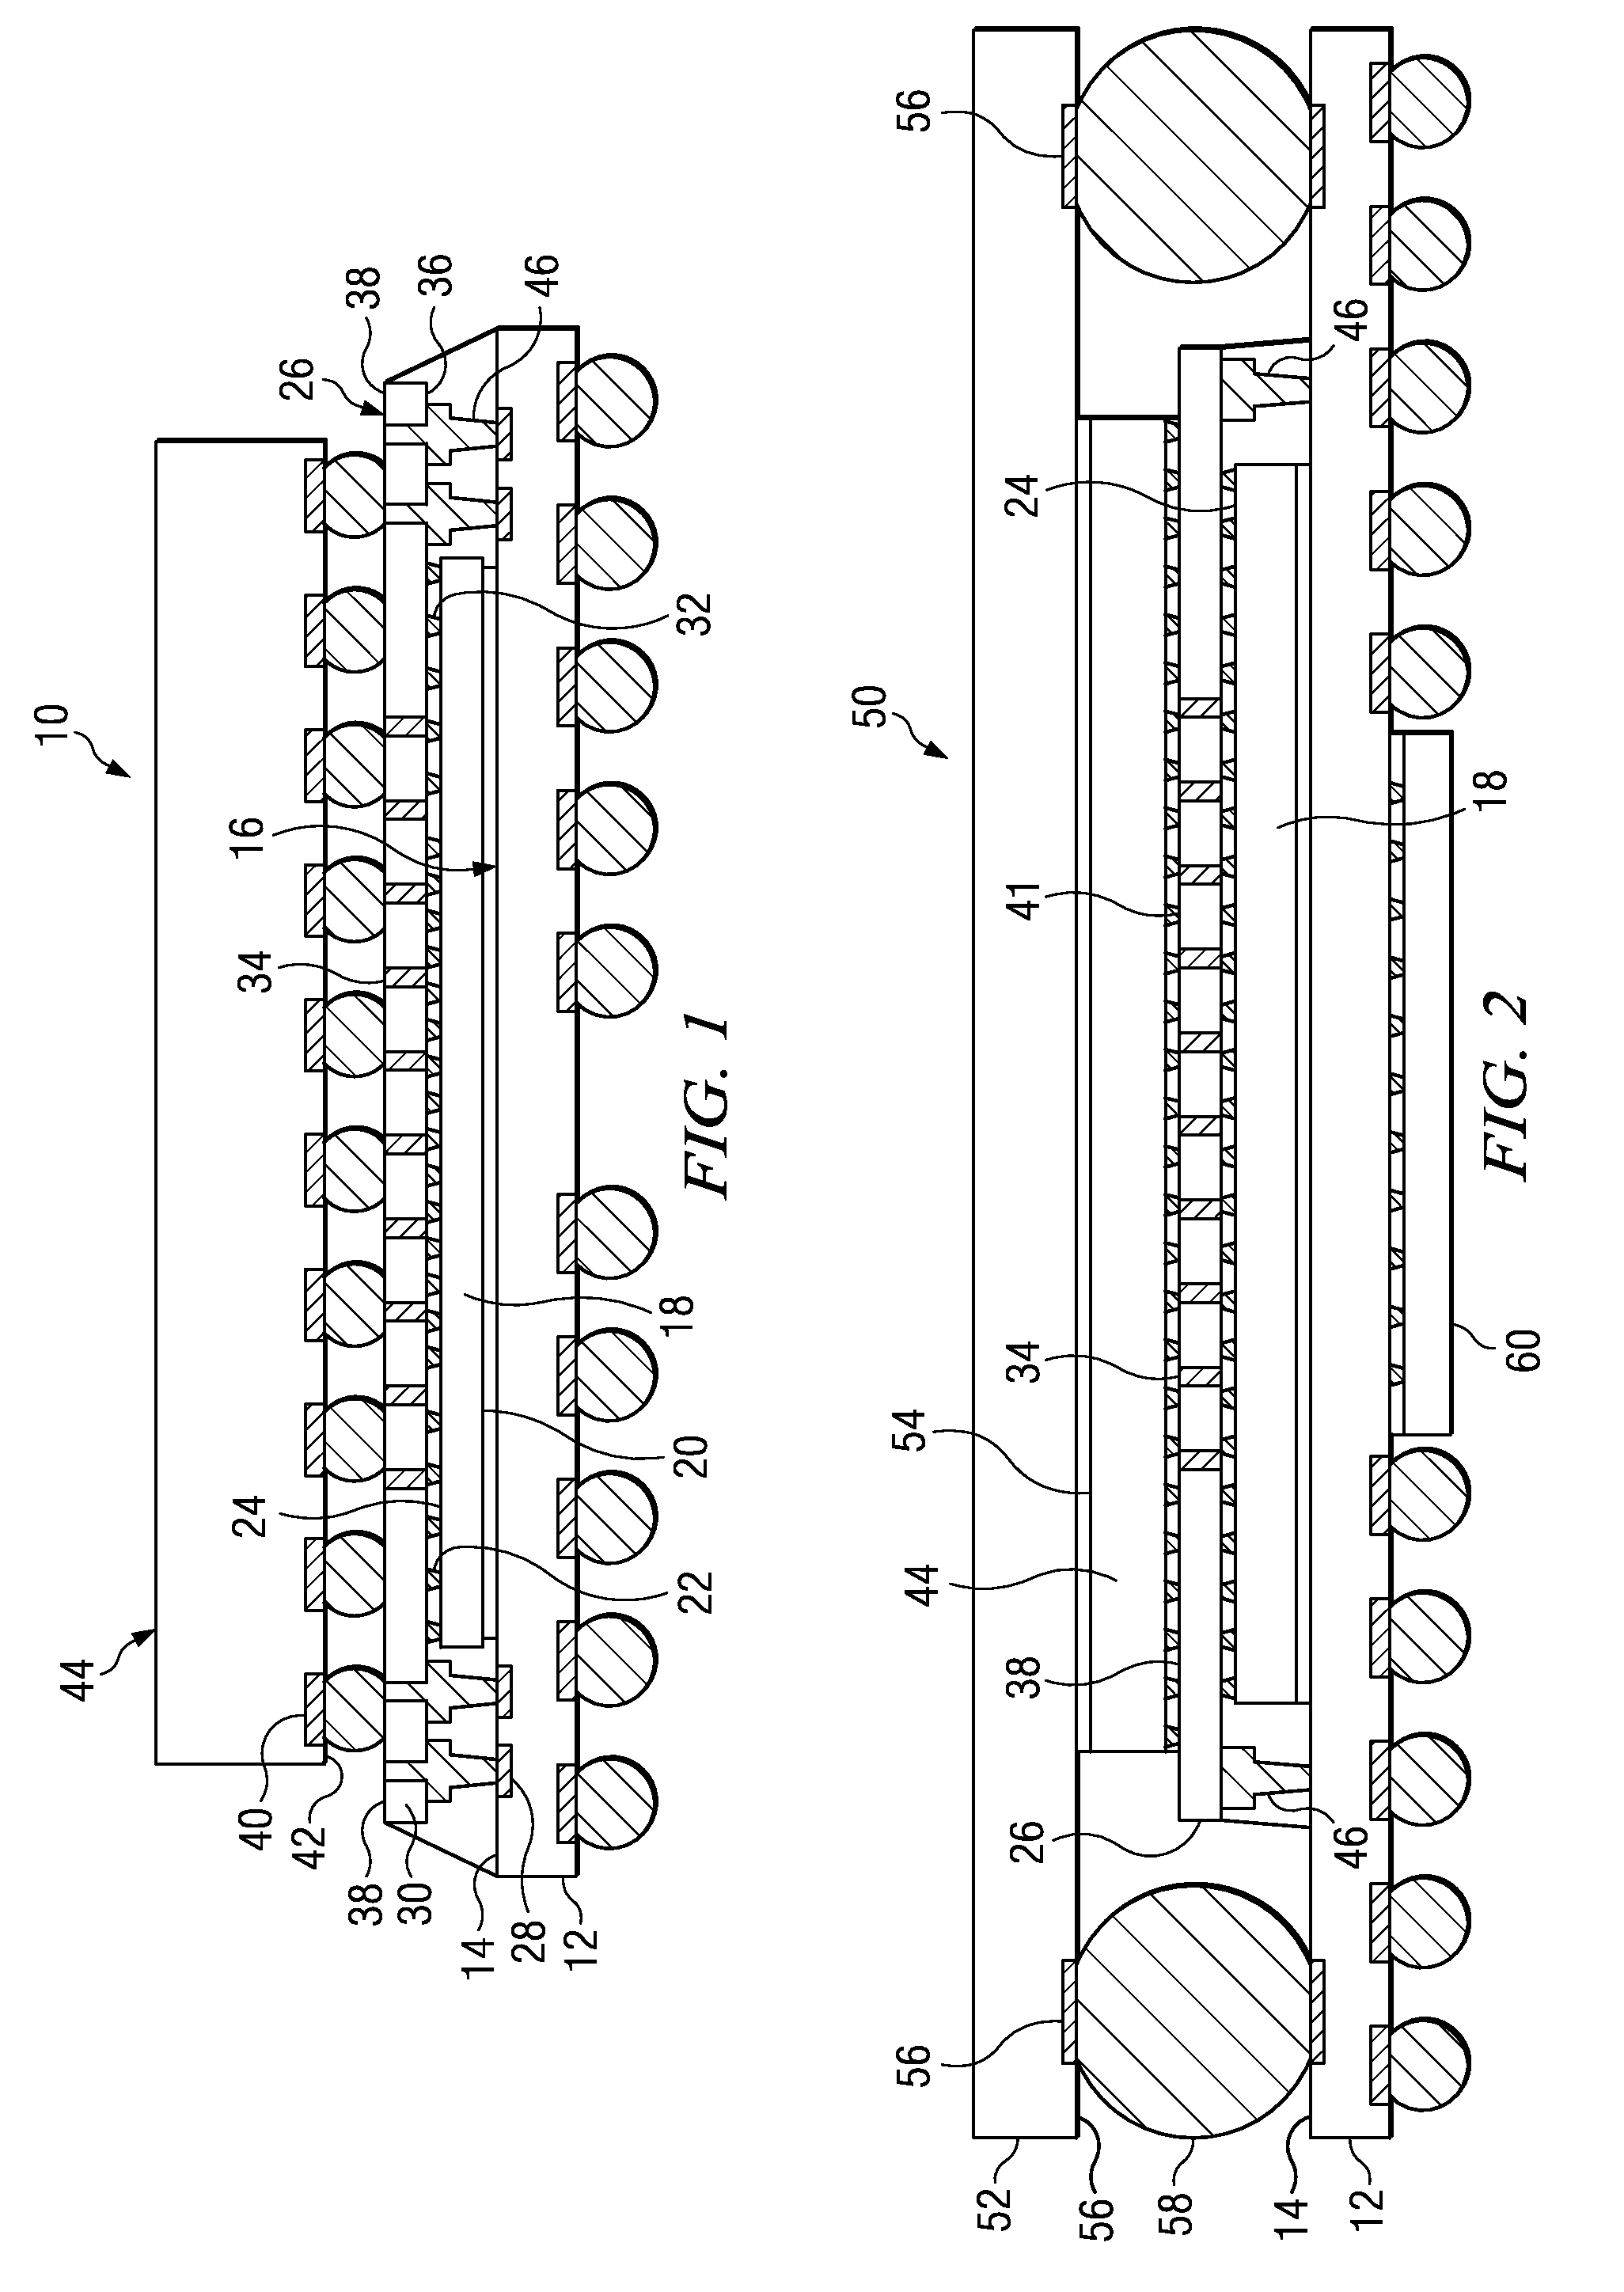 Package on Package Structure with thin film Interposing Layer